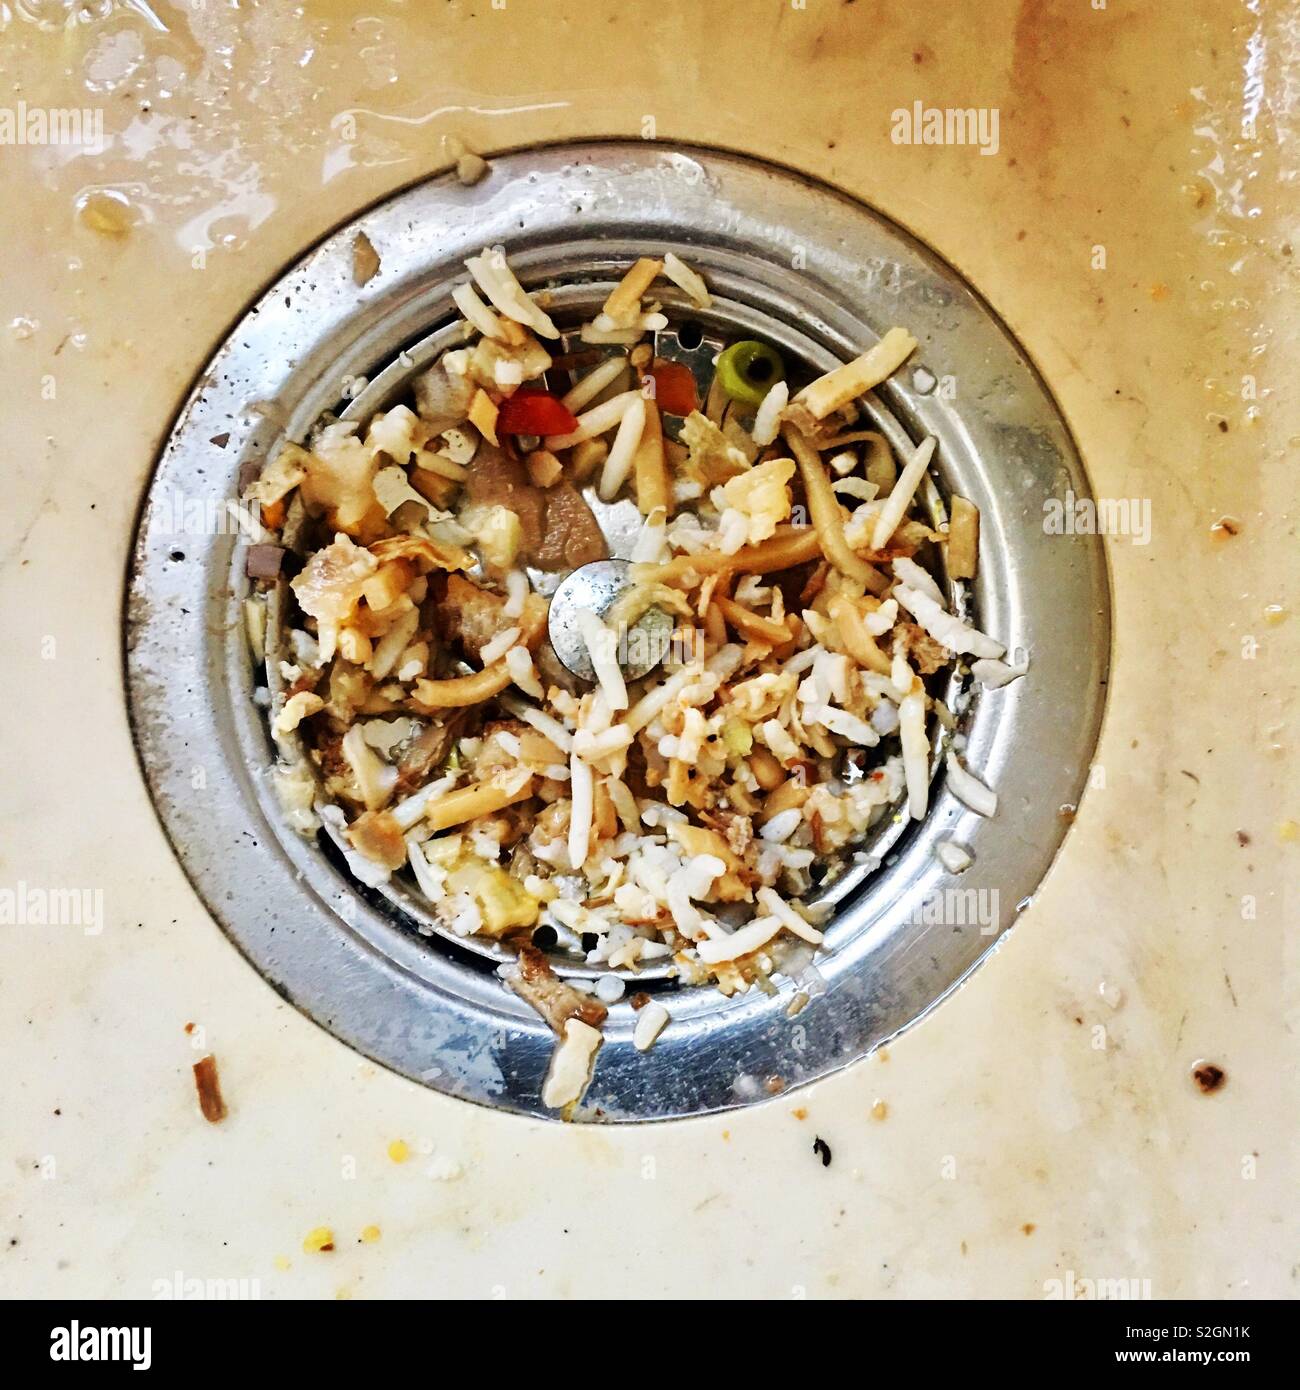 Collected food waste in sink plug. Stock Photo